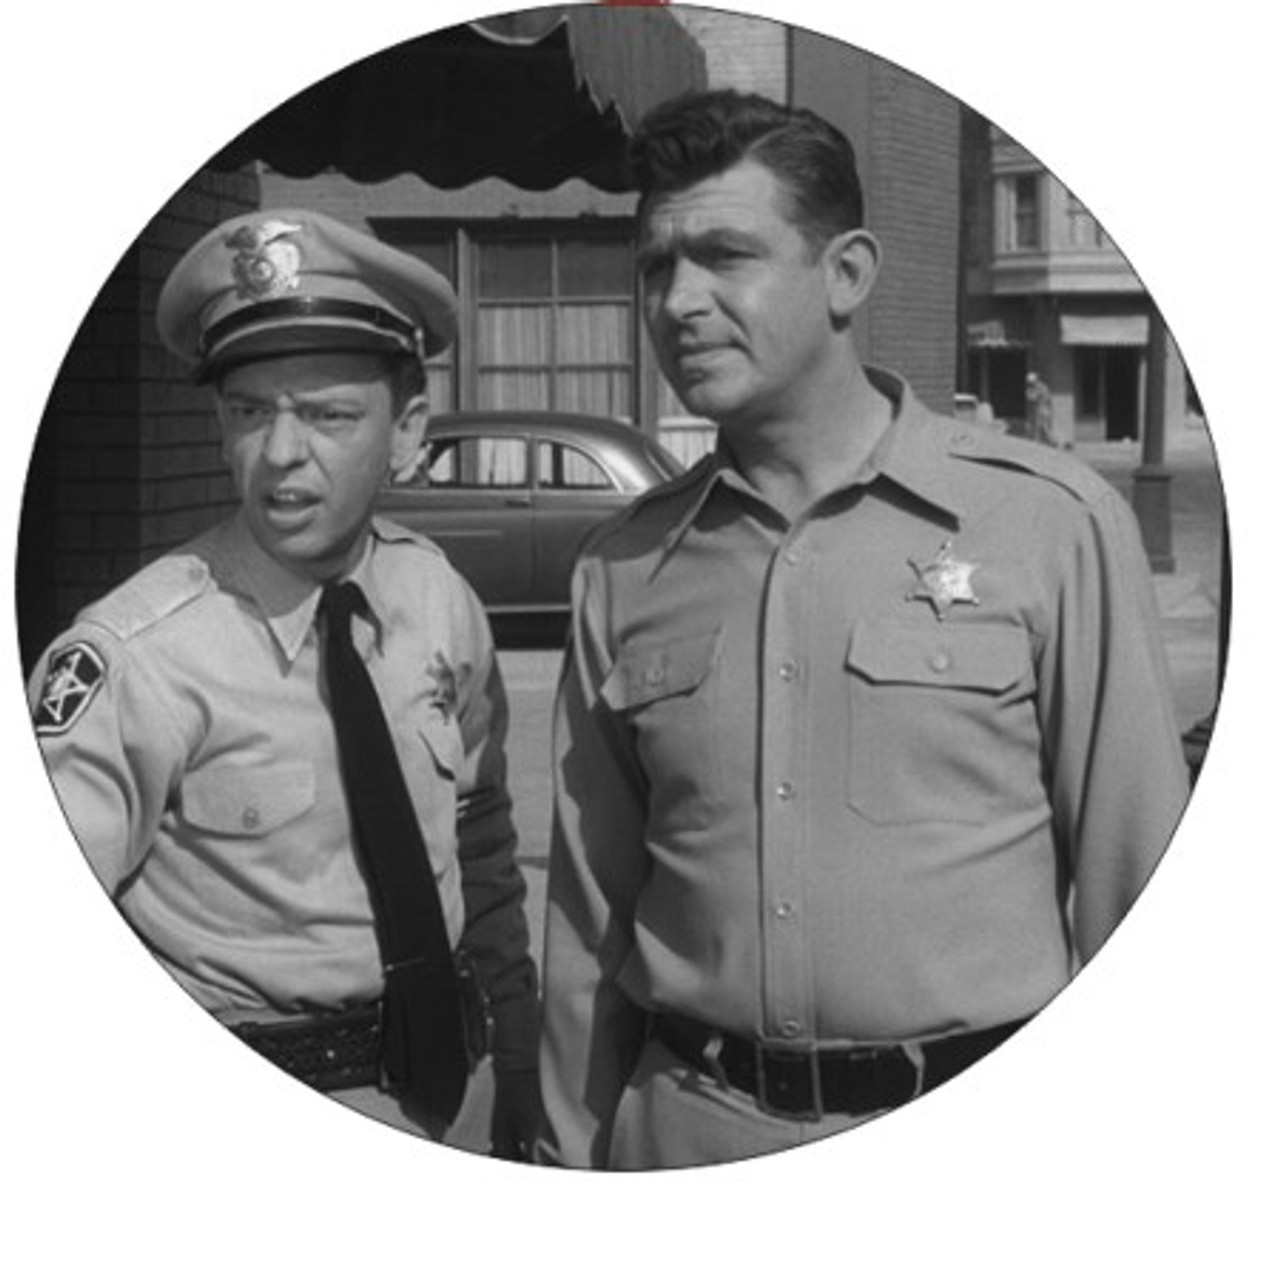 Set of 4 Coaters barney fife andy griffith.jpg